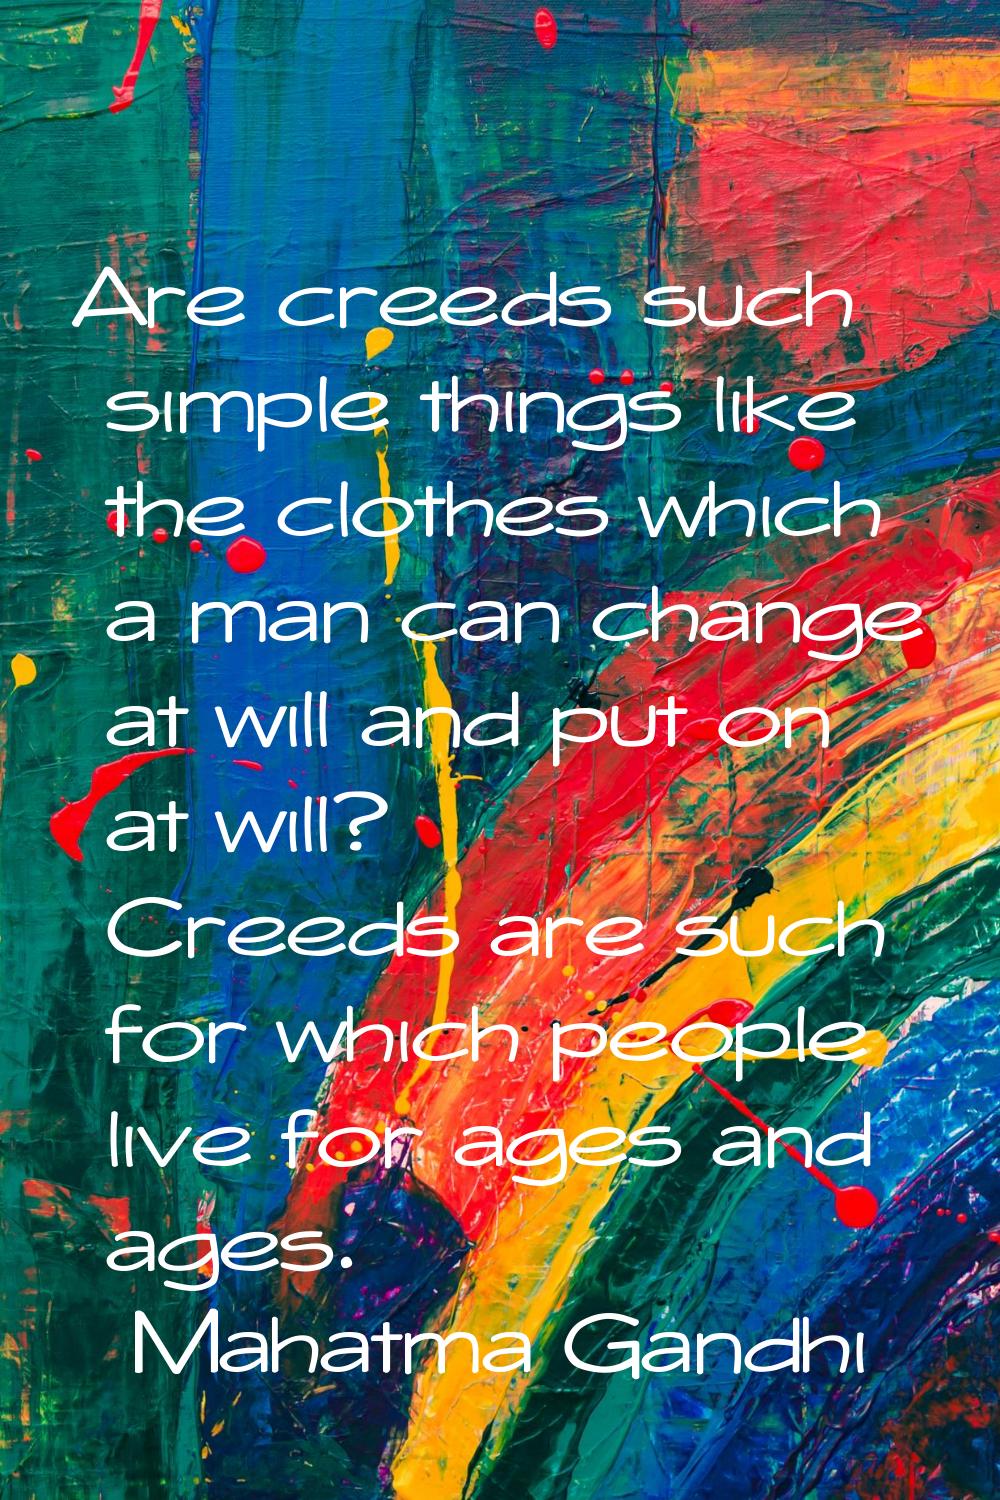 Are creeds such simple things like the clothes which a man can change at will and put on at will? C